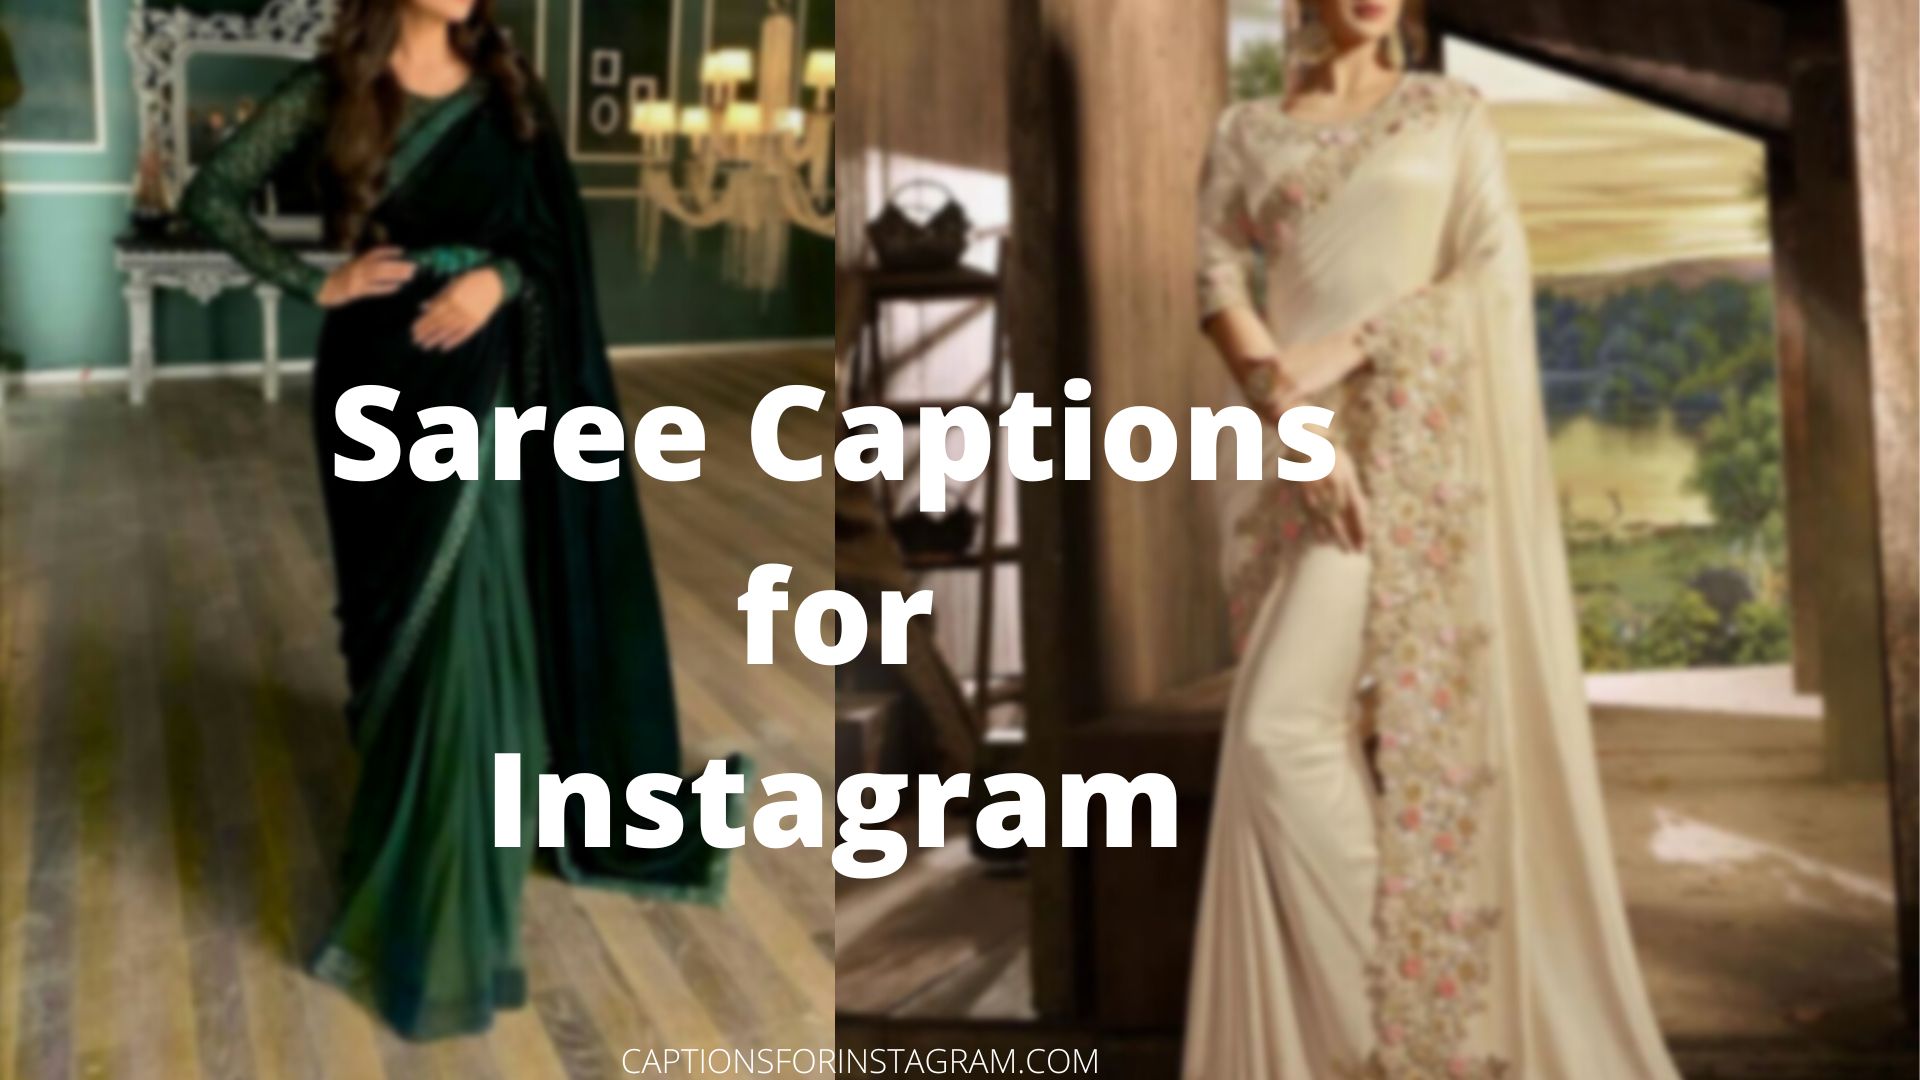 200 Indian Fashion Hashtags Trending On Instagram For More Followers